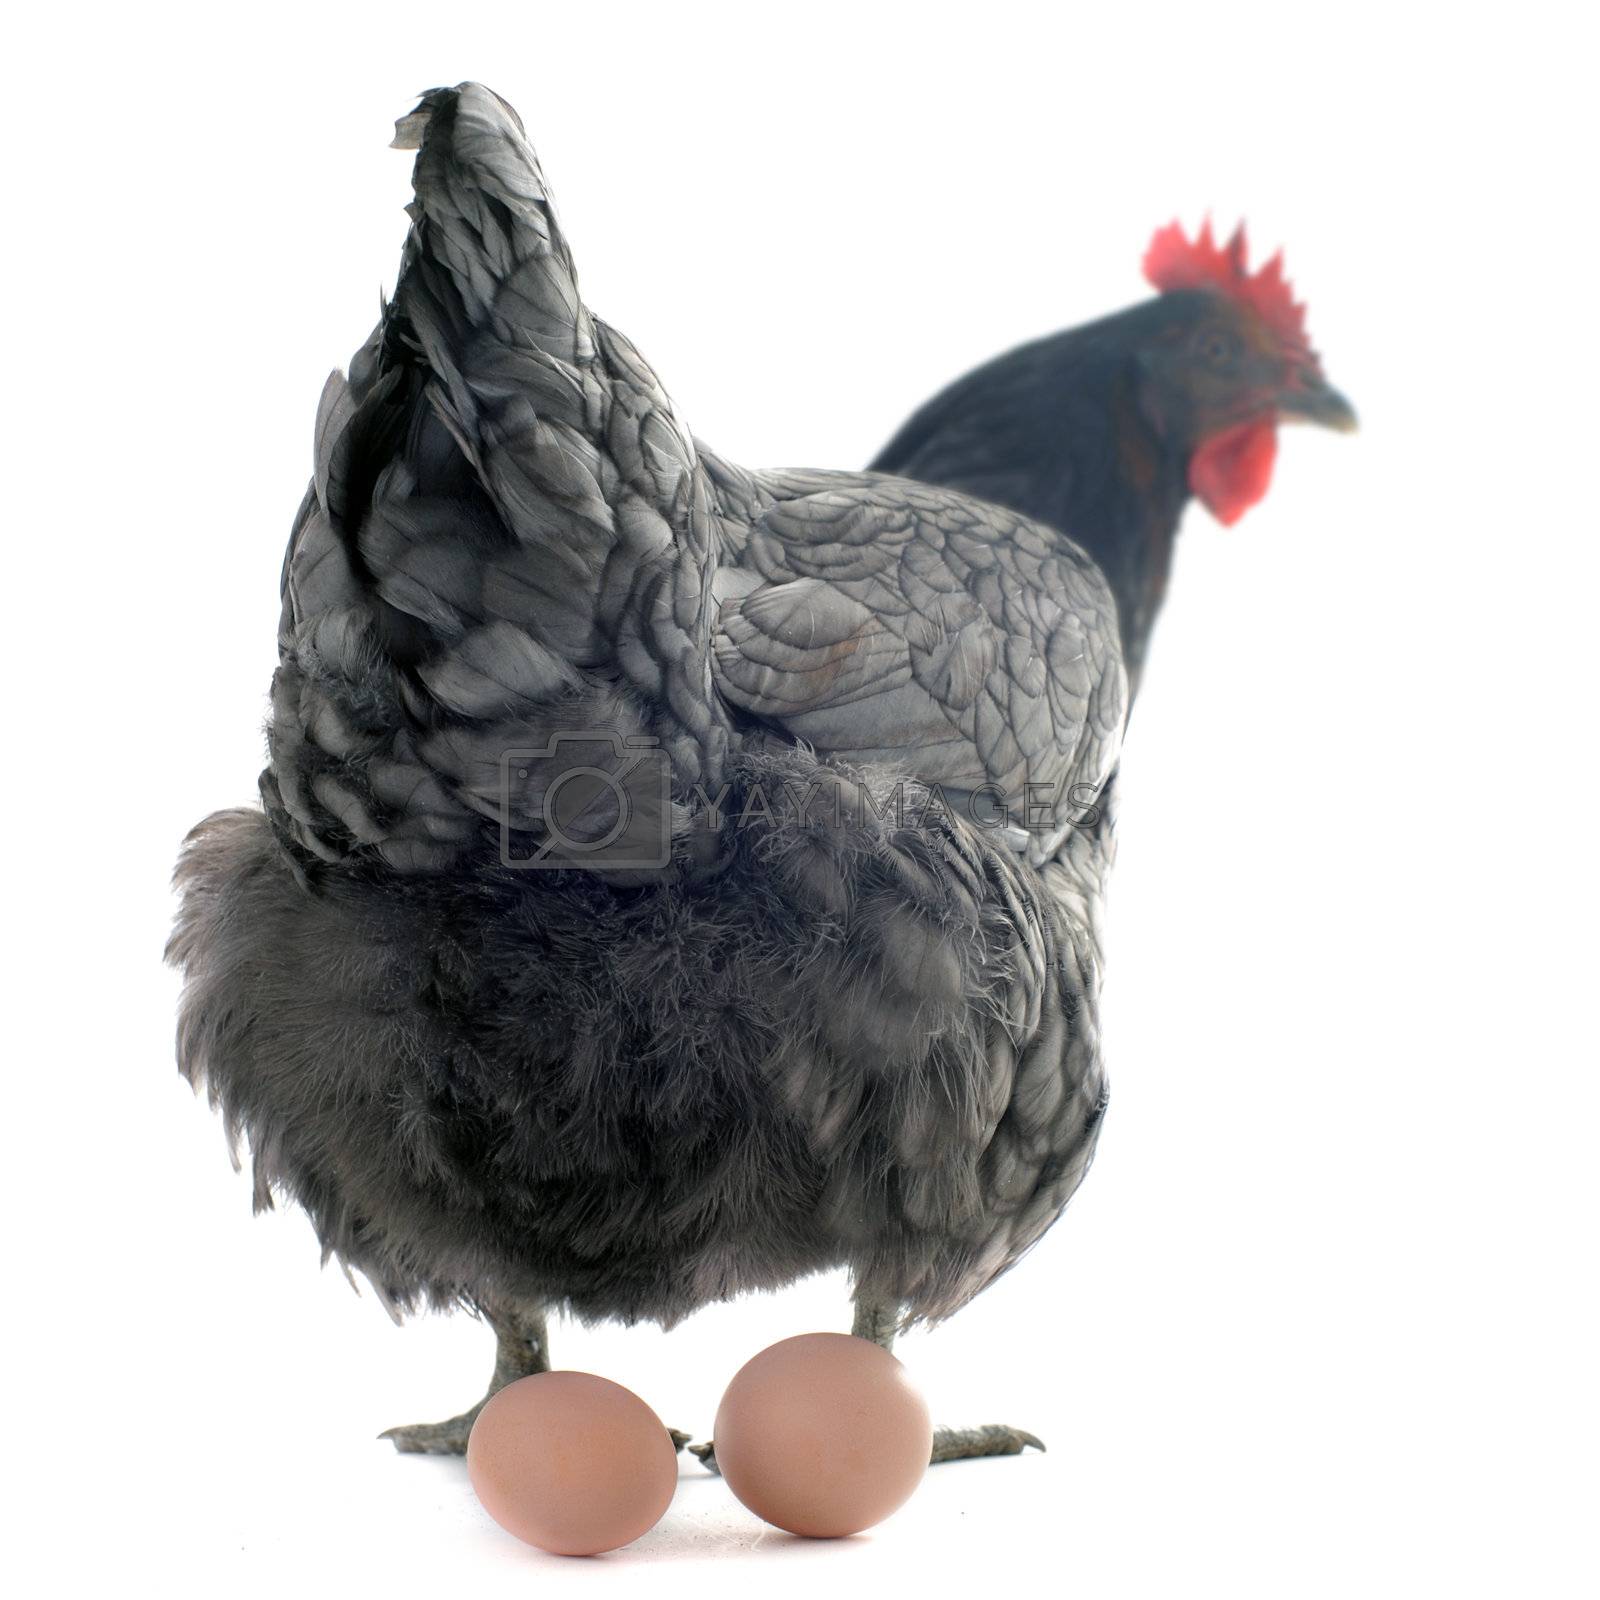 Royalty free image of chicken and eggs by cynoclub